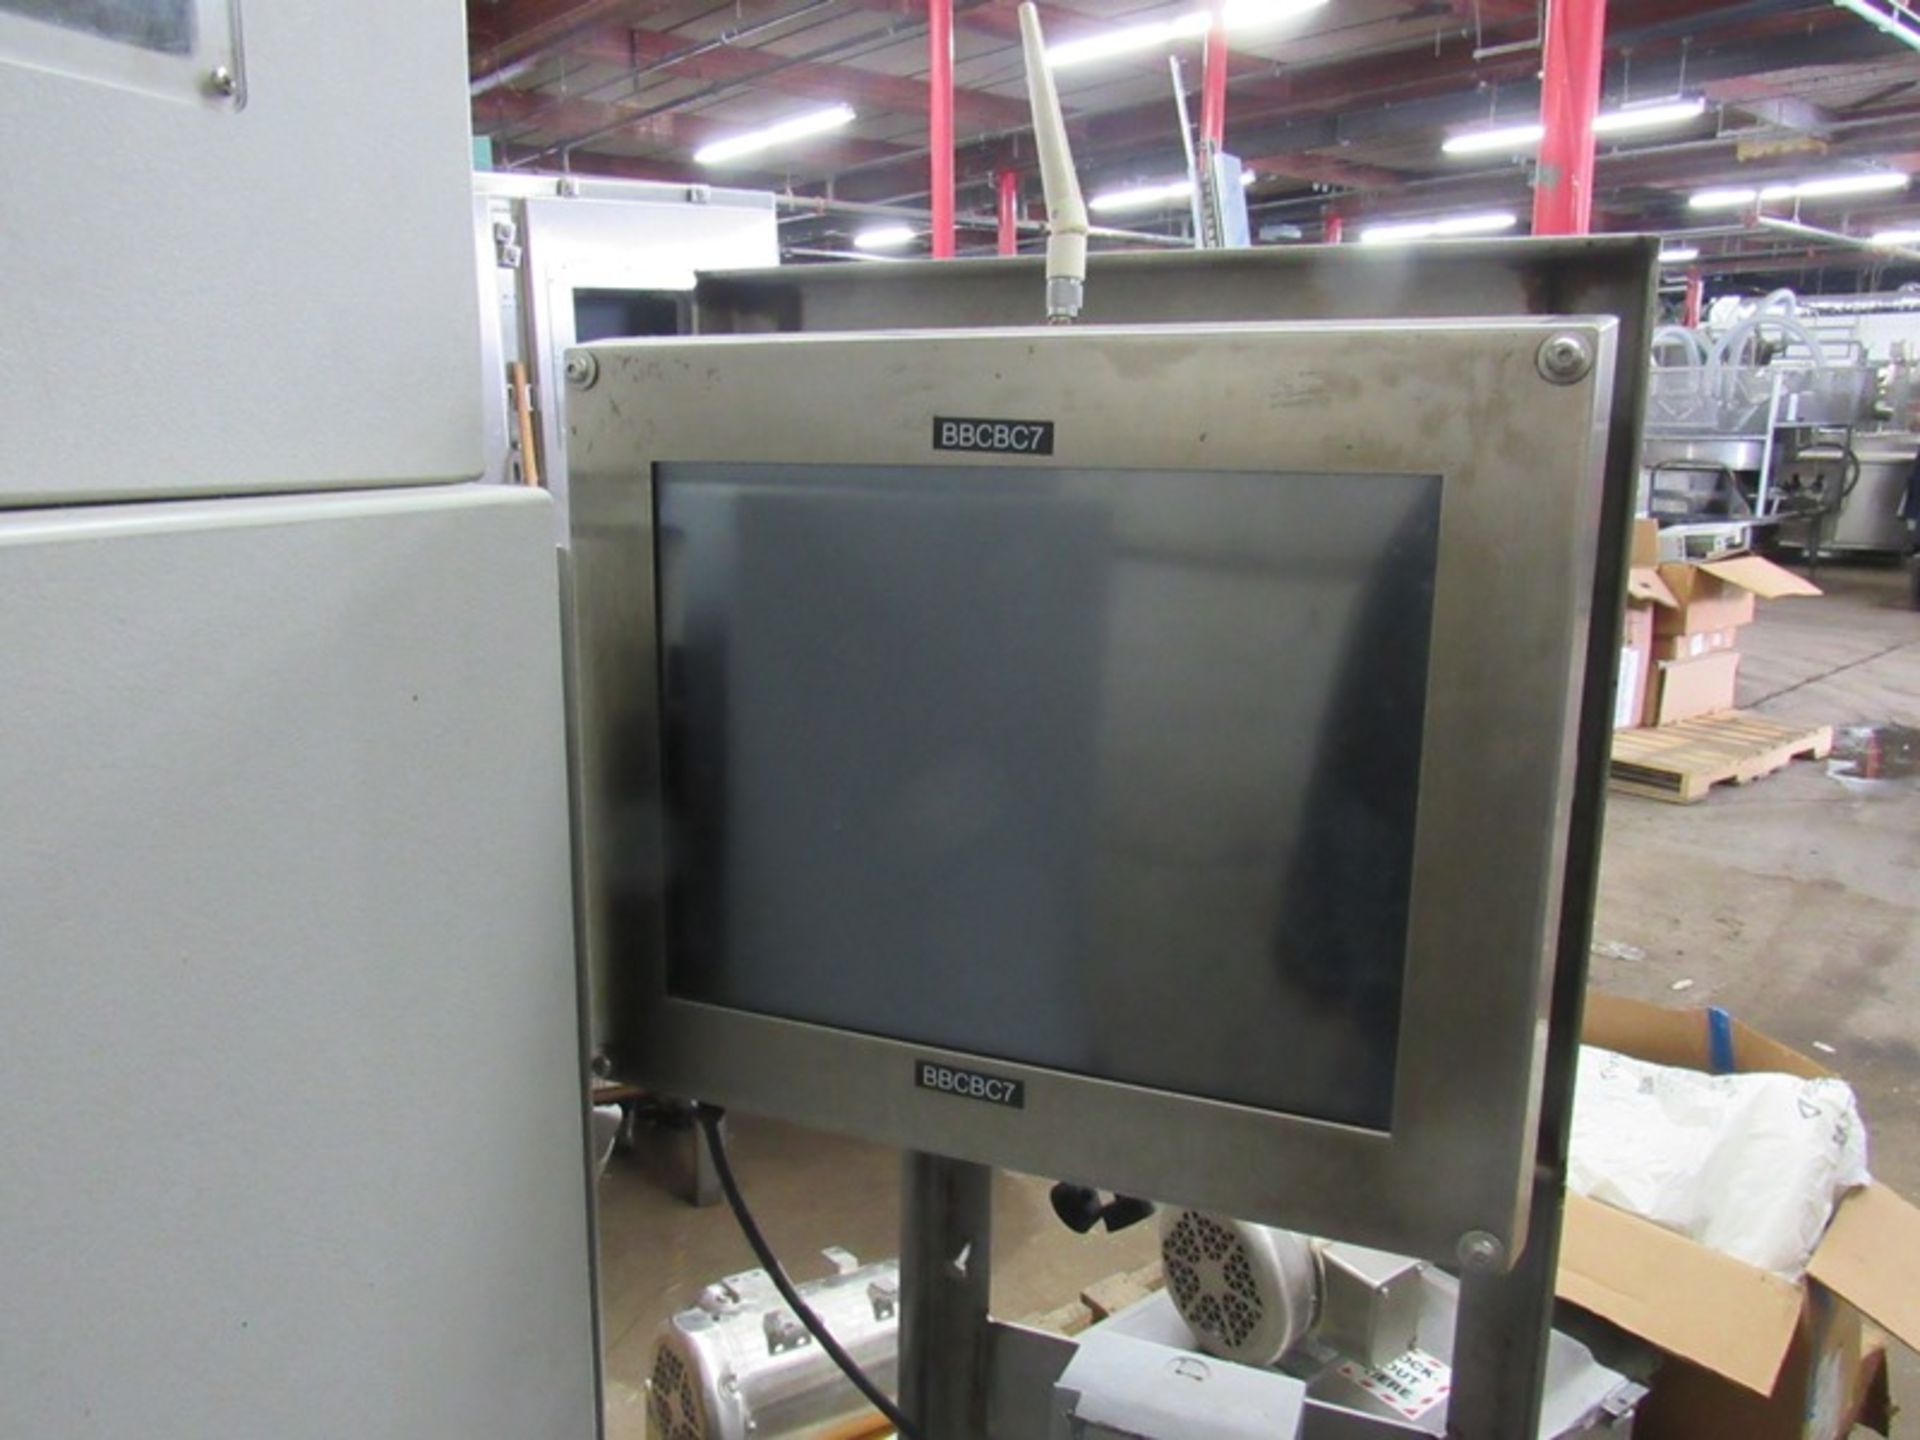 Zebra Mdl. 105SL Label Printer in enclosure, with 13" monitor, router, touchscreen keyboard on - Image 5 of 5